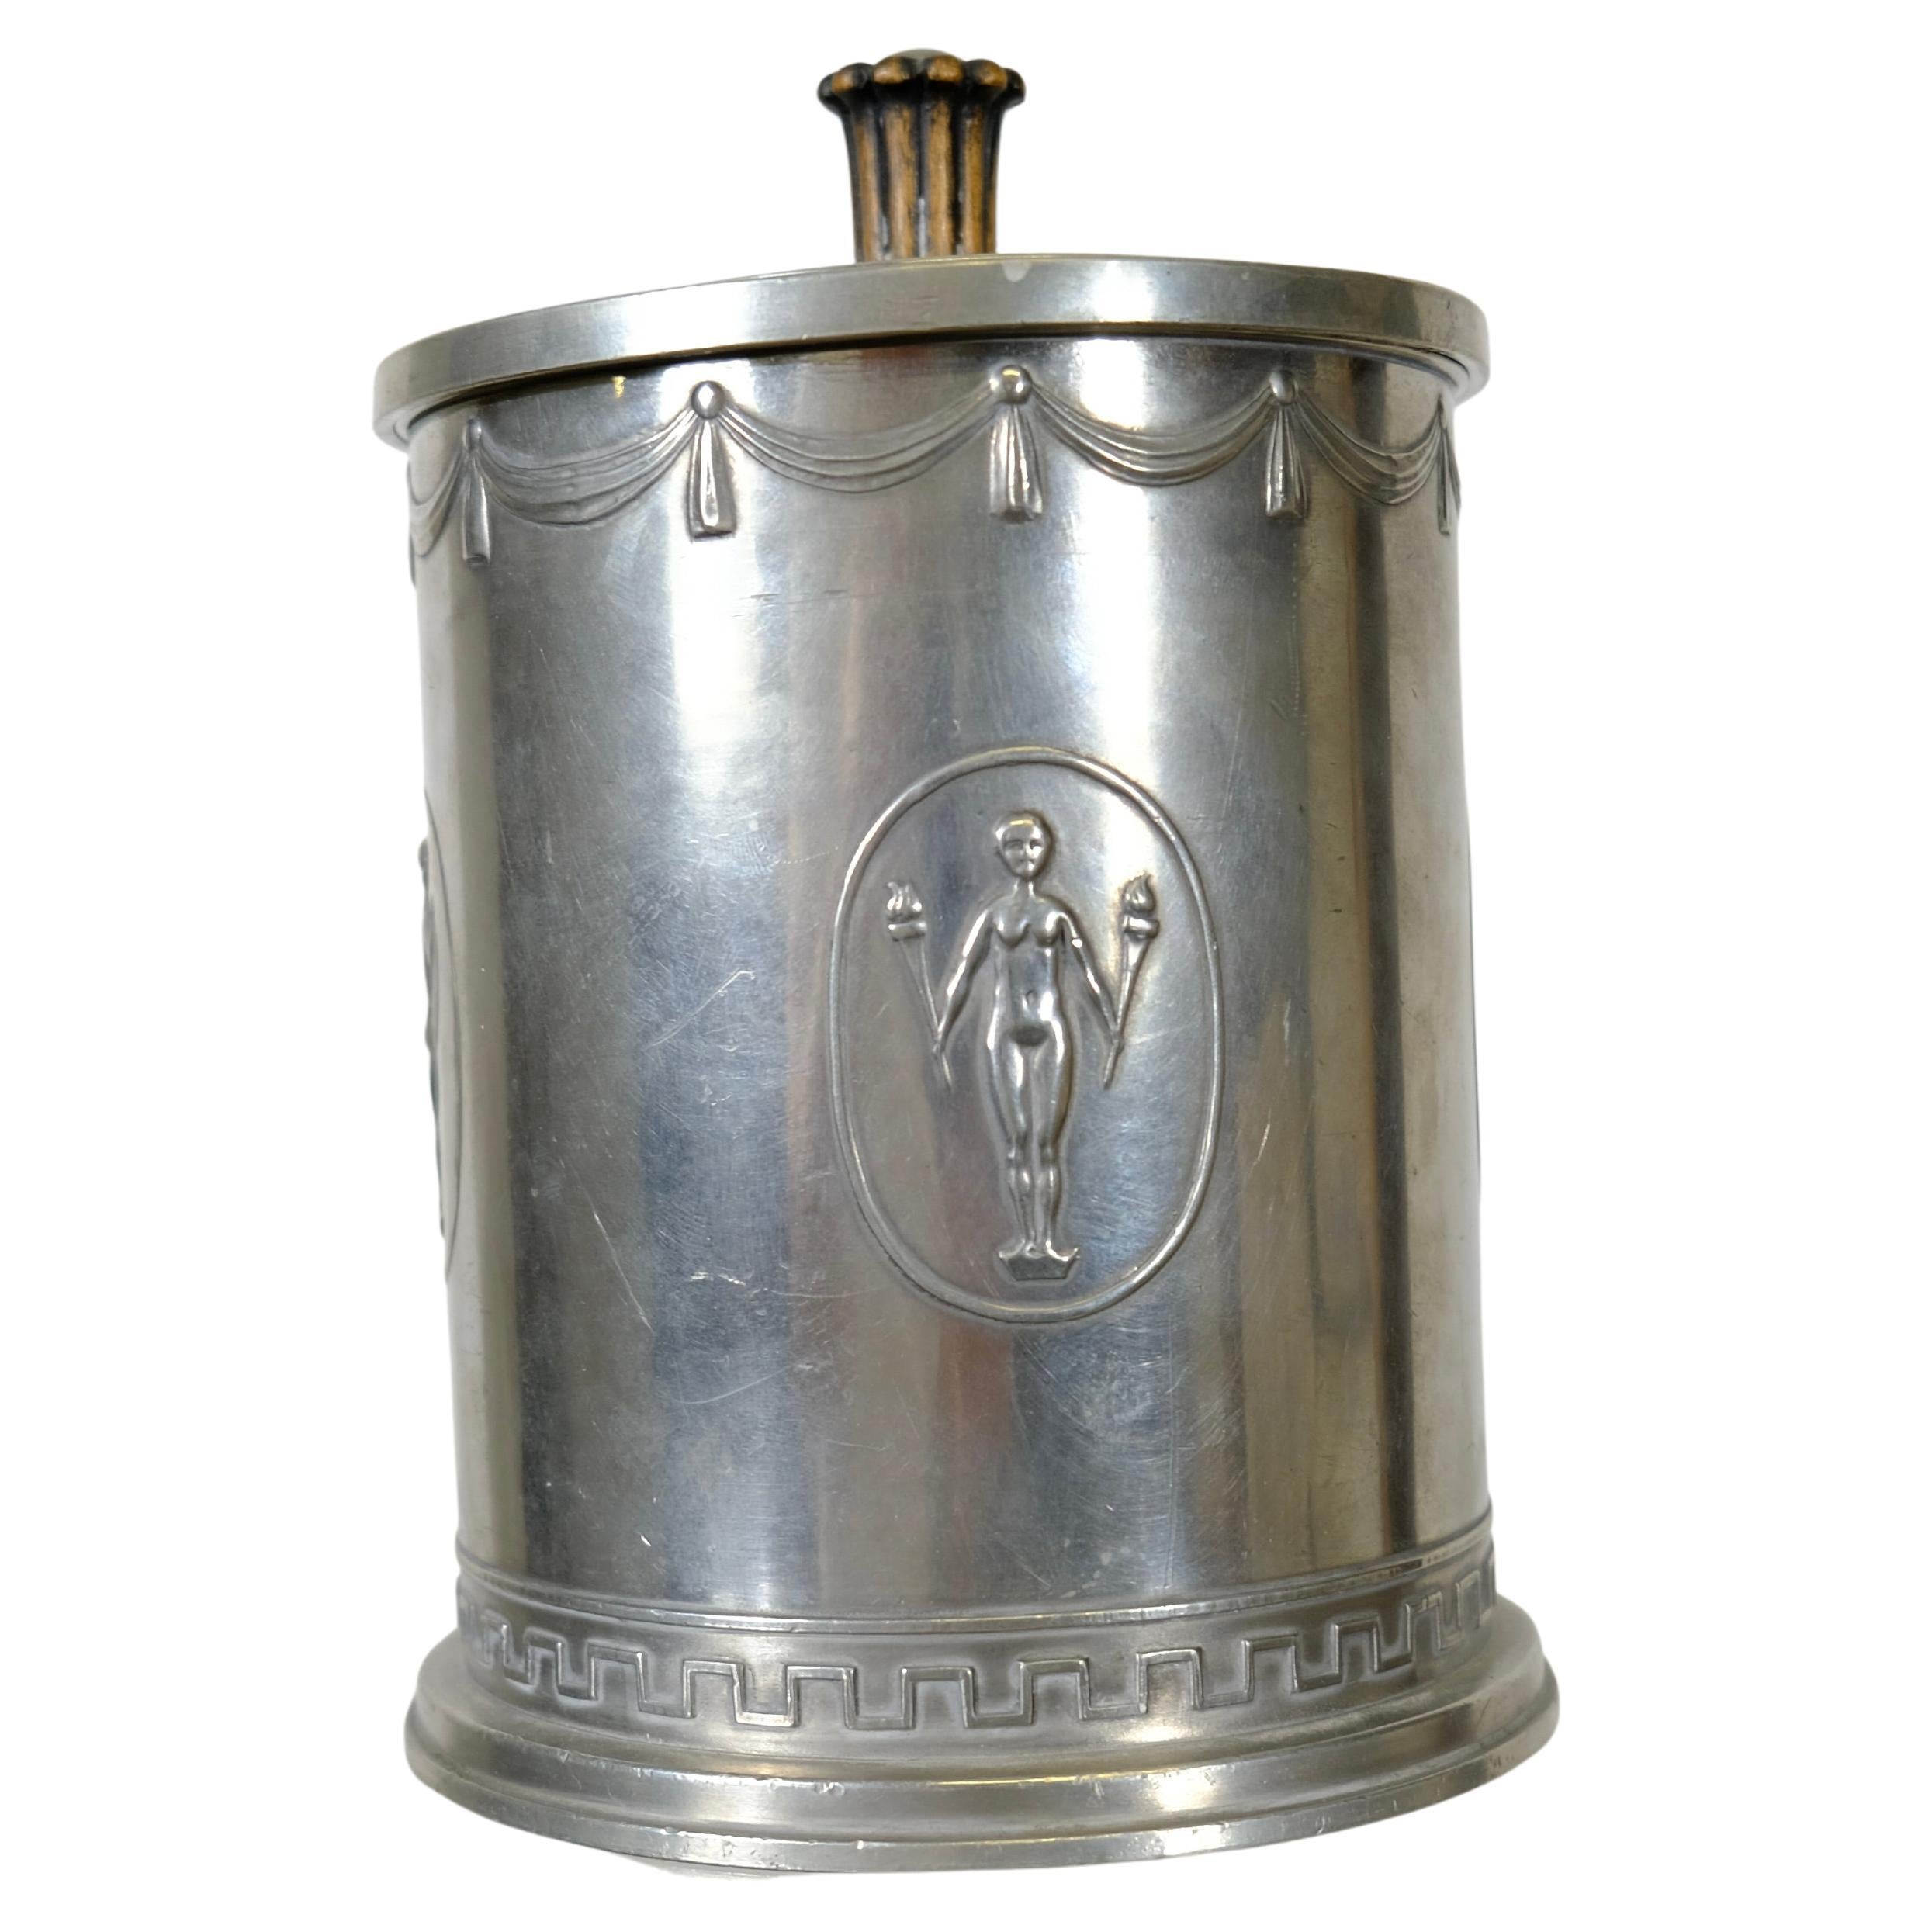 A Swedish Grace pewter jar with lid made by The company Schreuder & Olsson in 1927. This is a very typical object for its time and could have been used for cigars. 
The 1920s was an important period in Swedish design and has internationally become